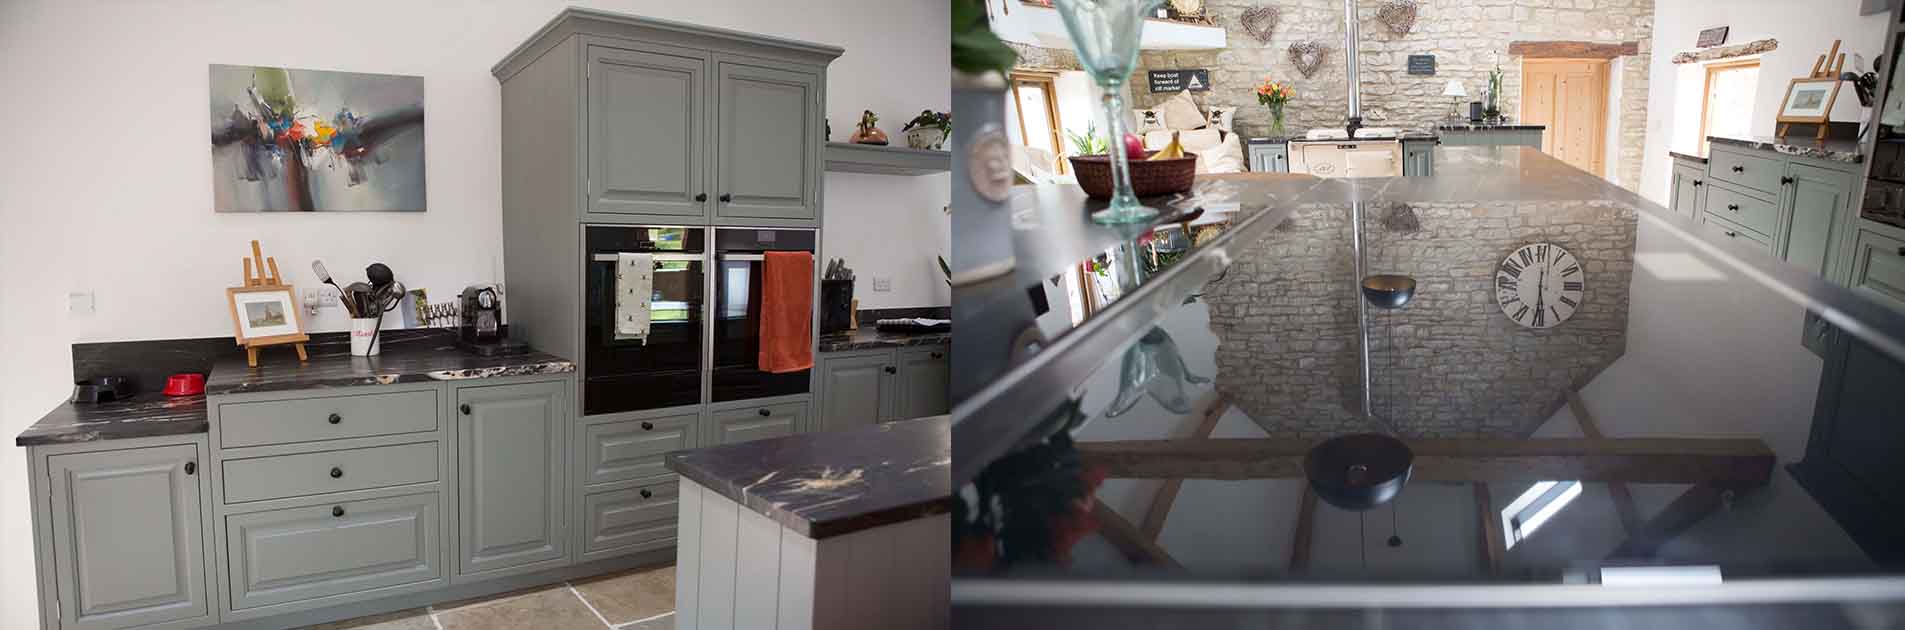 Kitchen Case Study: Prentice kitchen cabinetry and reflection of the beautiful high beams